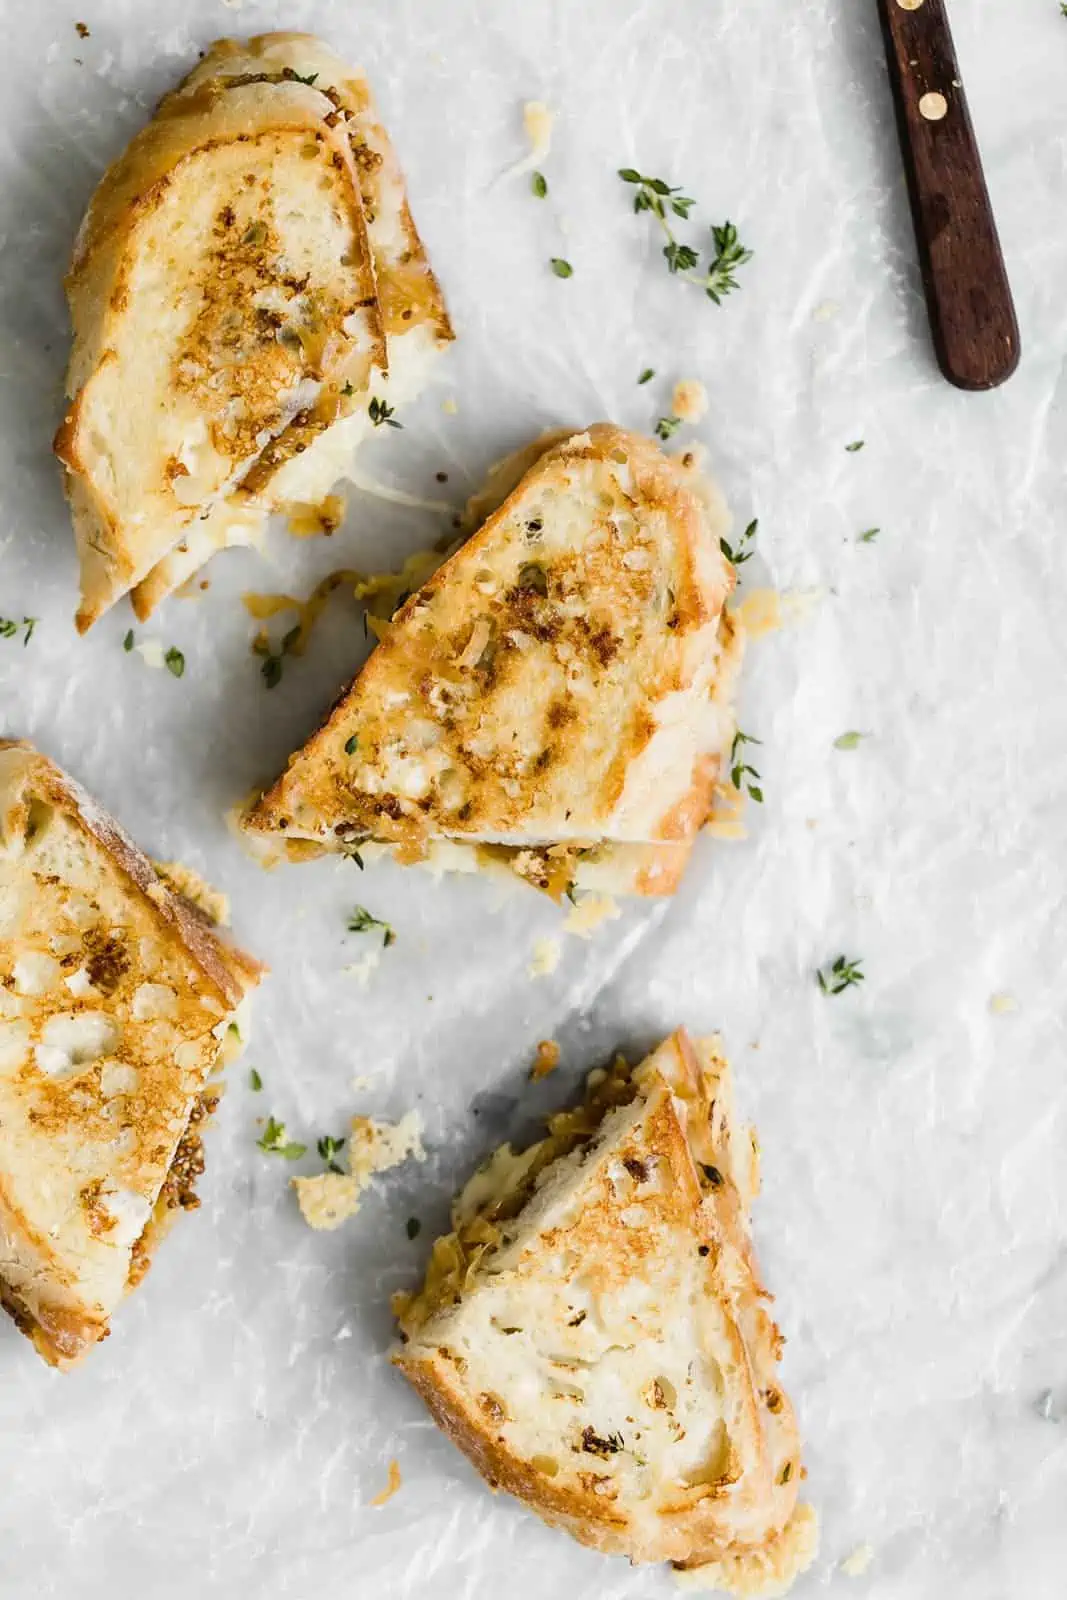 Caramelized Onion, Mustard and Gruyere Grilled Cheese